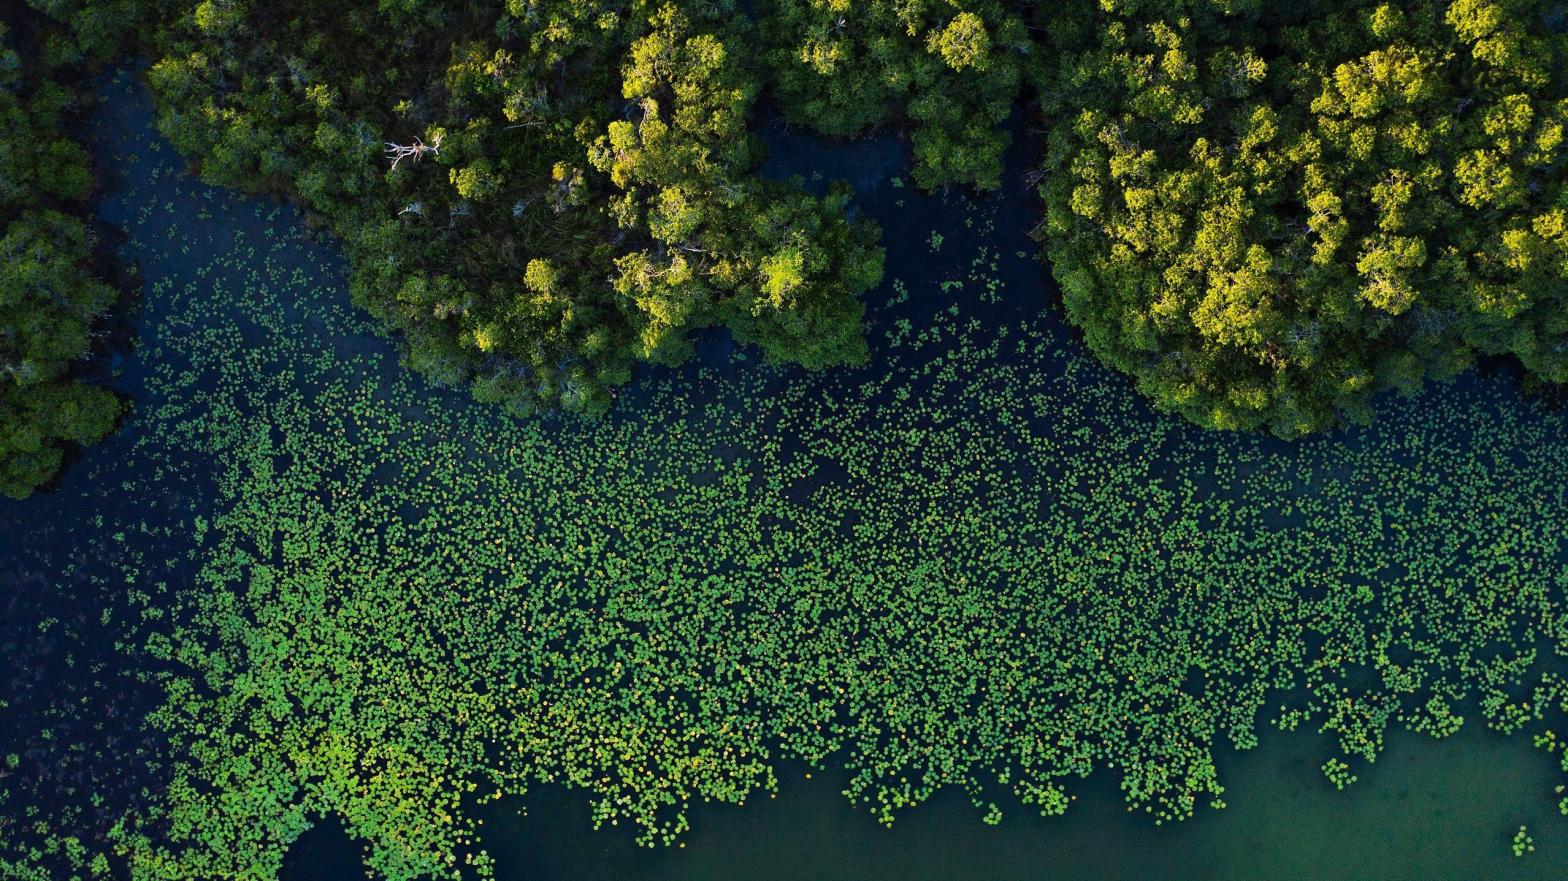 Aerial view of the red mangrove forests along the San Pedro Mártir River in Mexico. (Photo: Octavio Aburto)